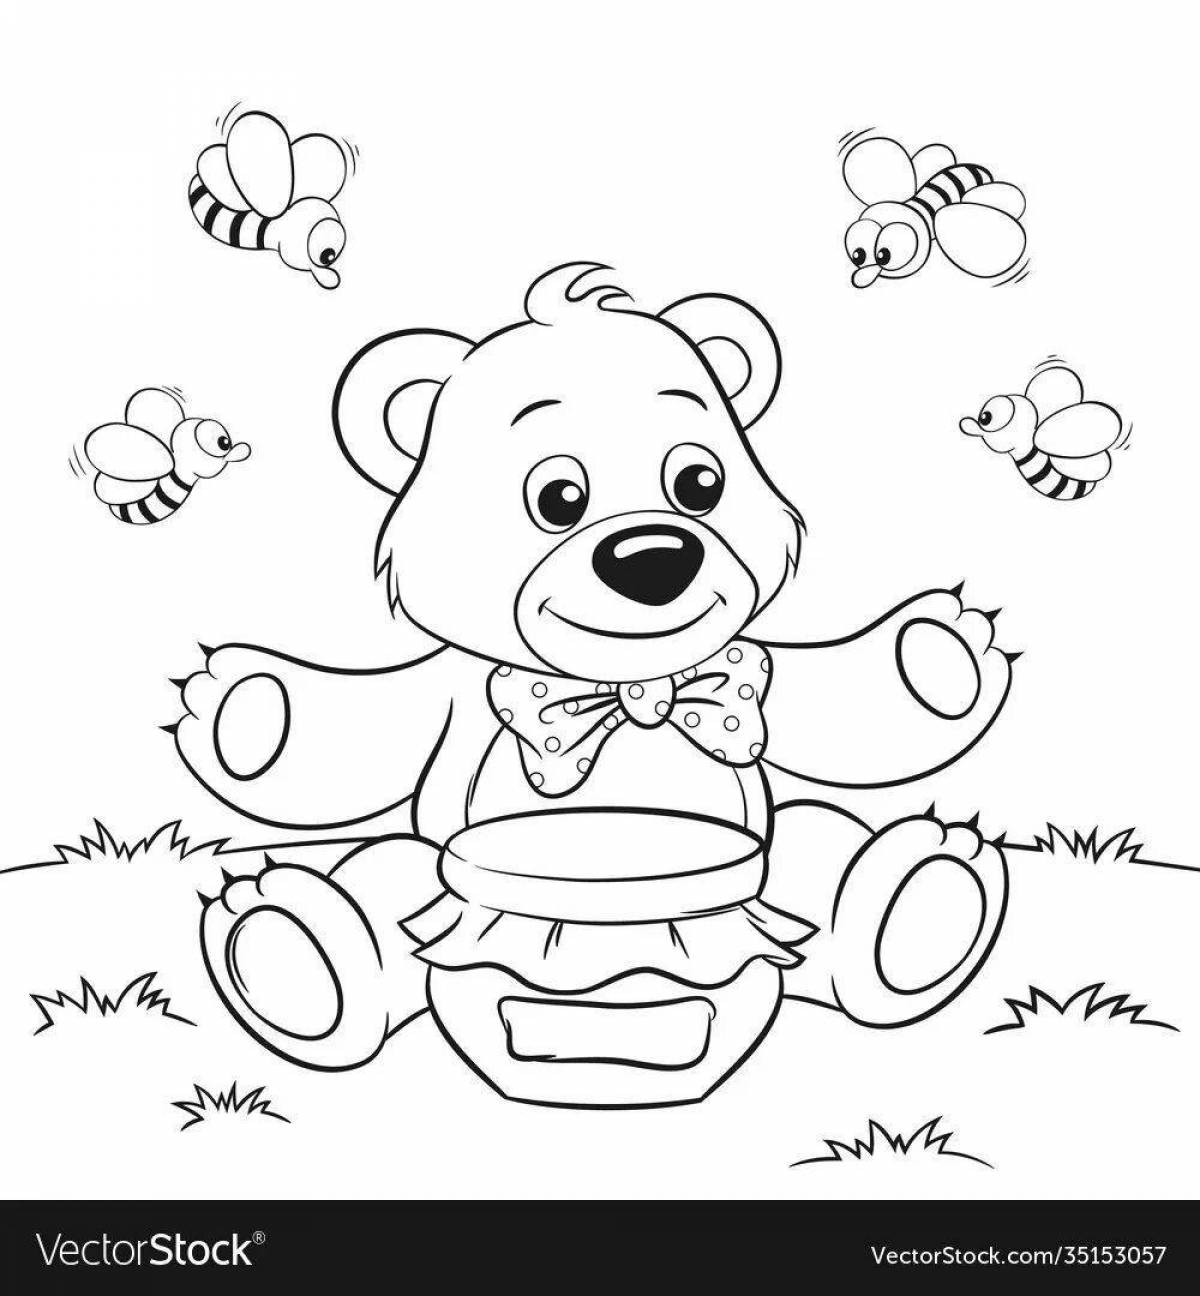 Colourful bear coloring book